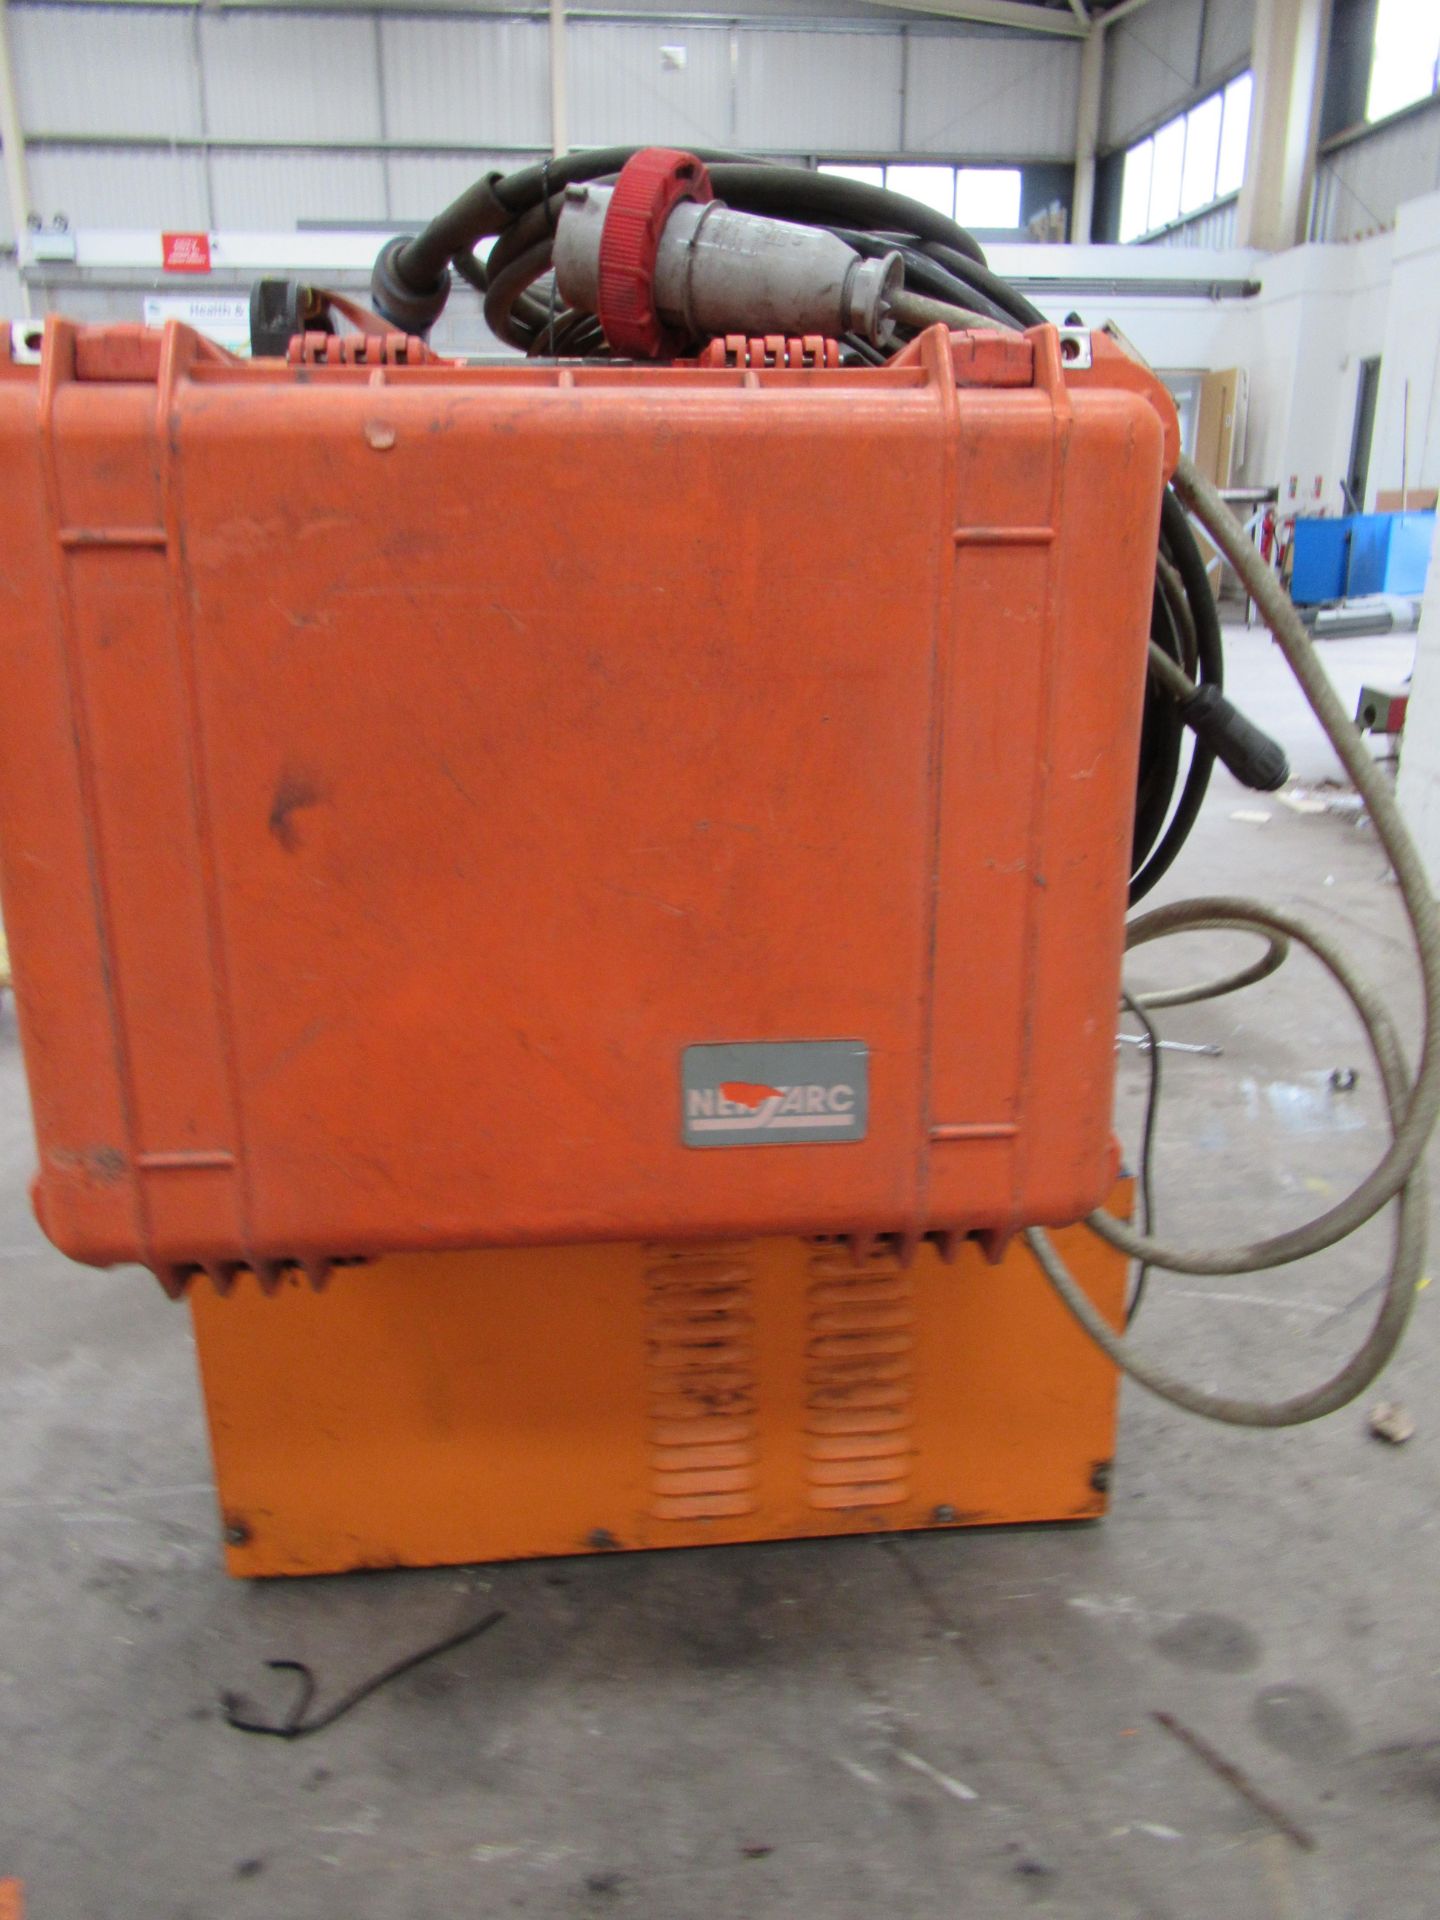 Newarc R4000 MiG welder with water cooler and Newarc WFU12RD wire feed with torch and leads - Image 4 of 9